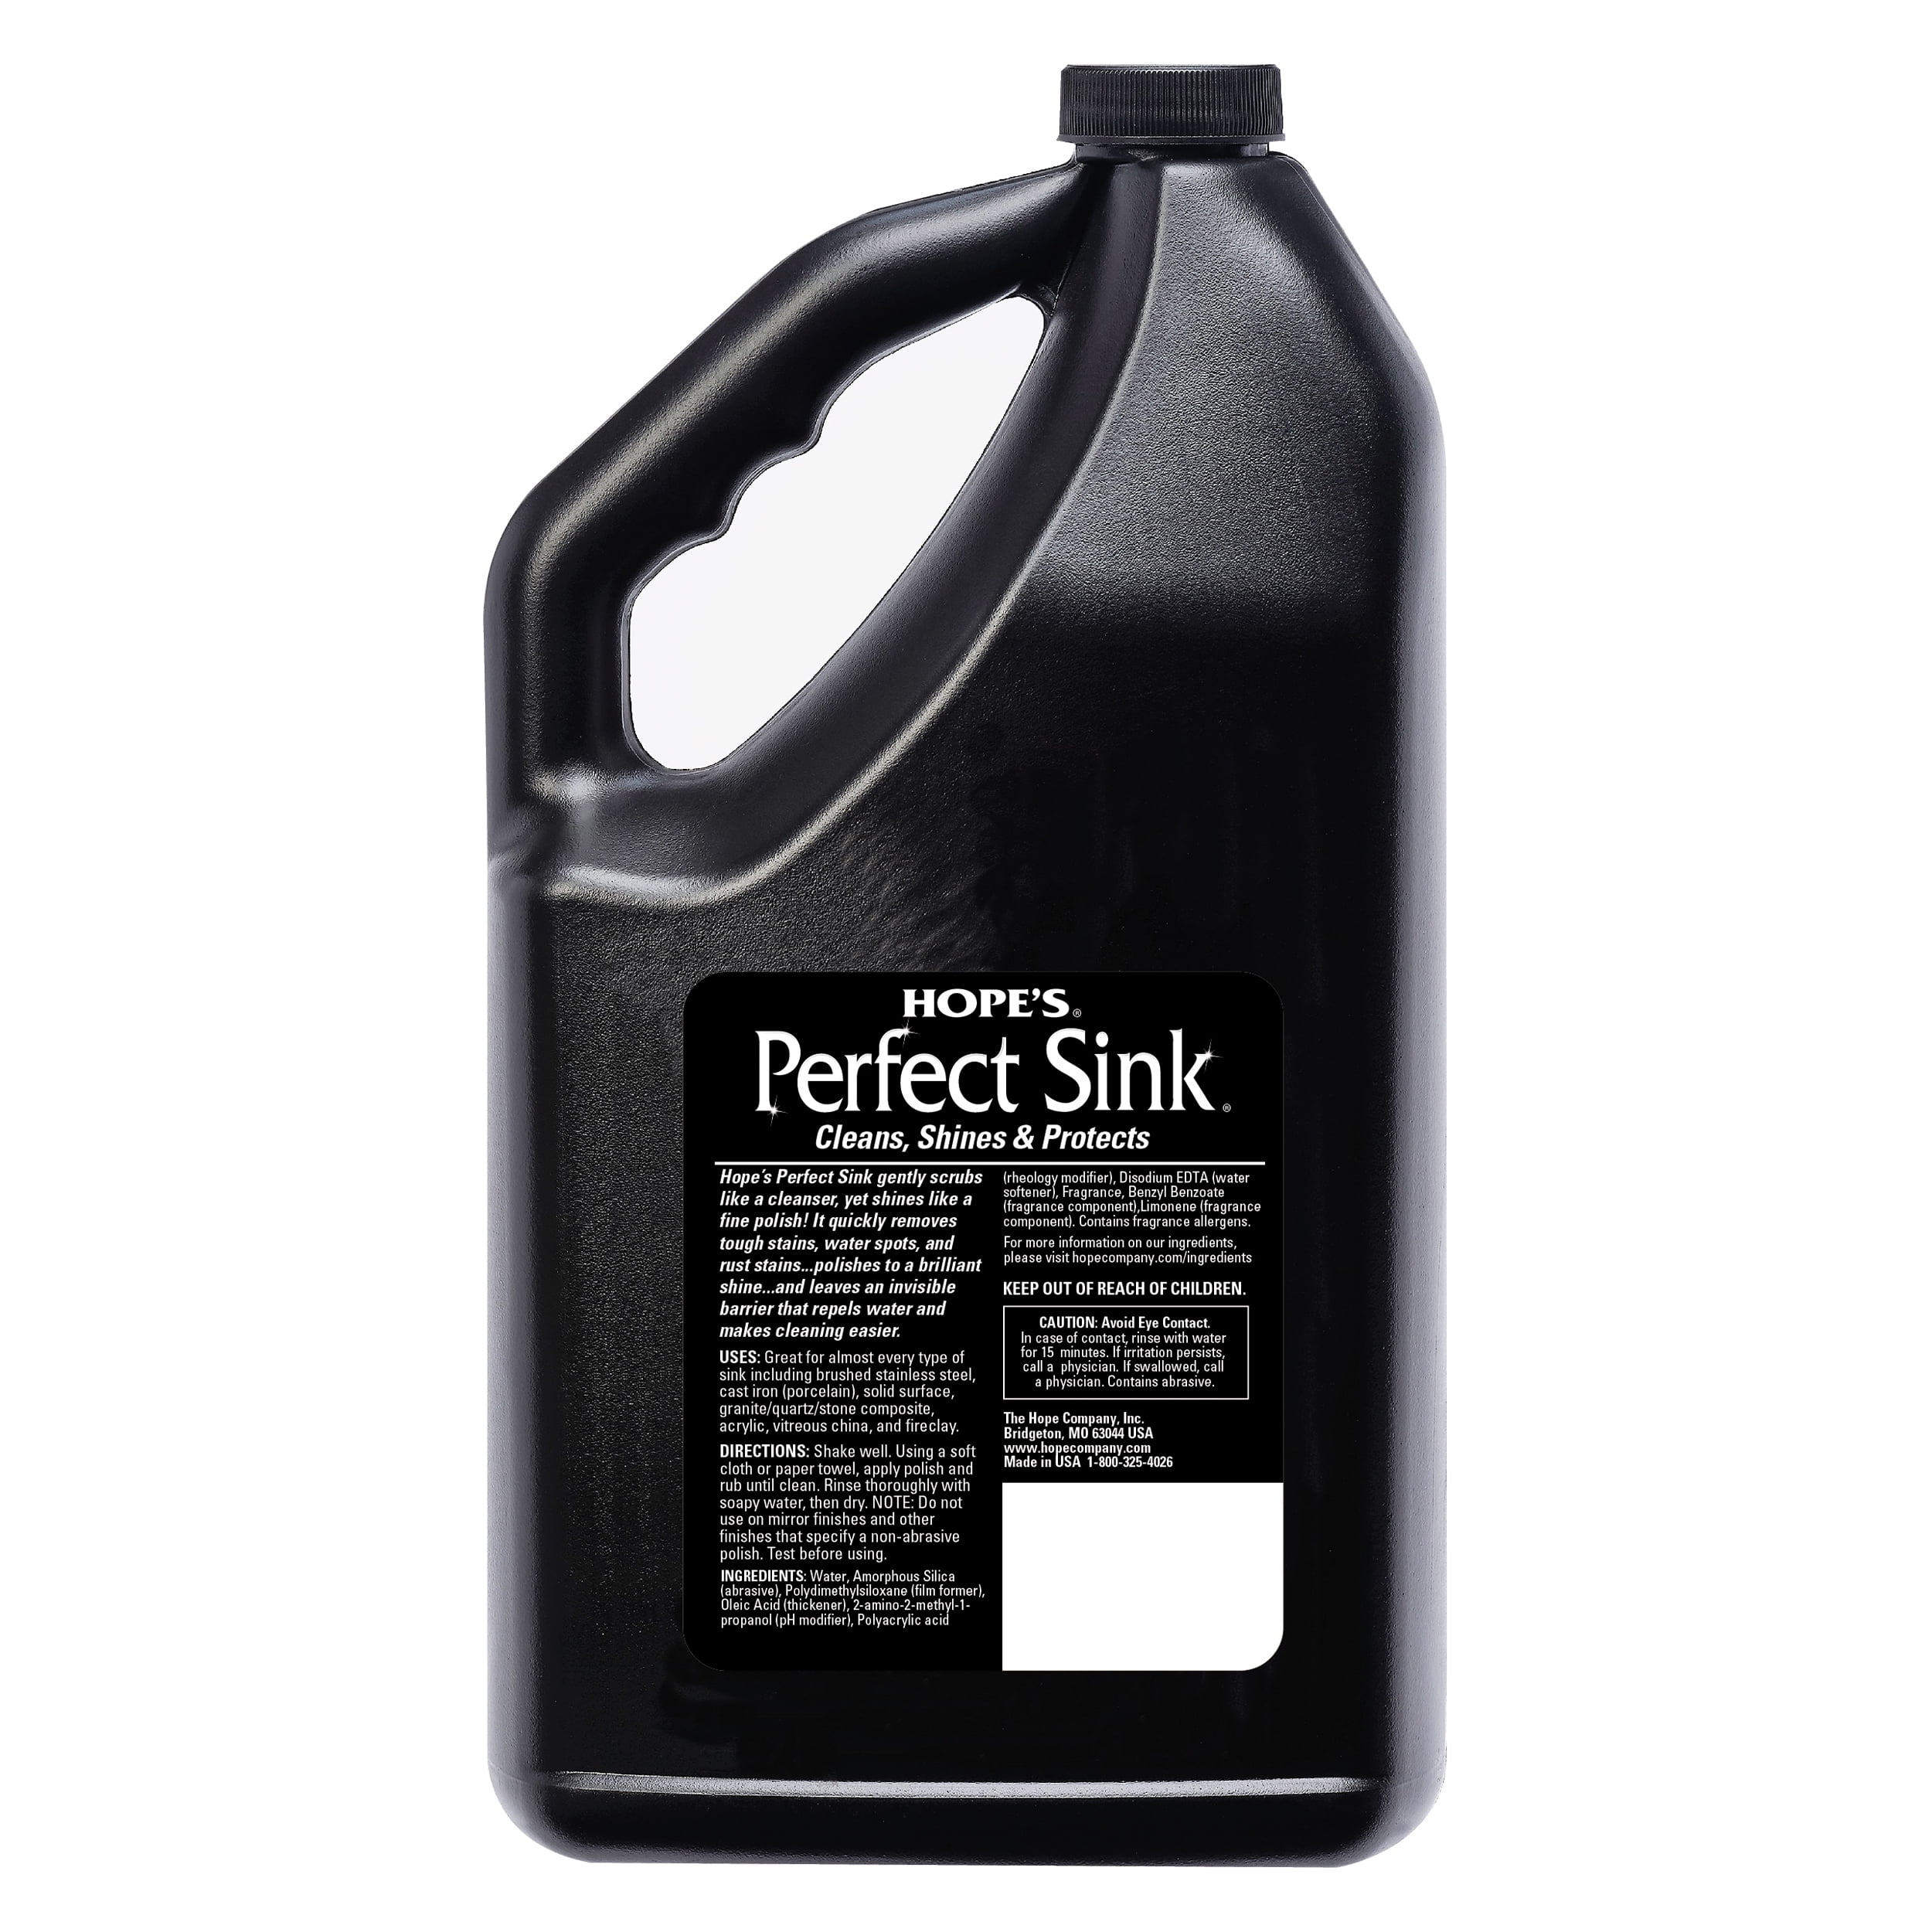 Hopes 9SK6 8.5 oz. Perfect Sink Cleaner and Polish